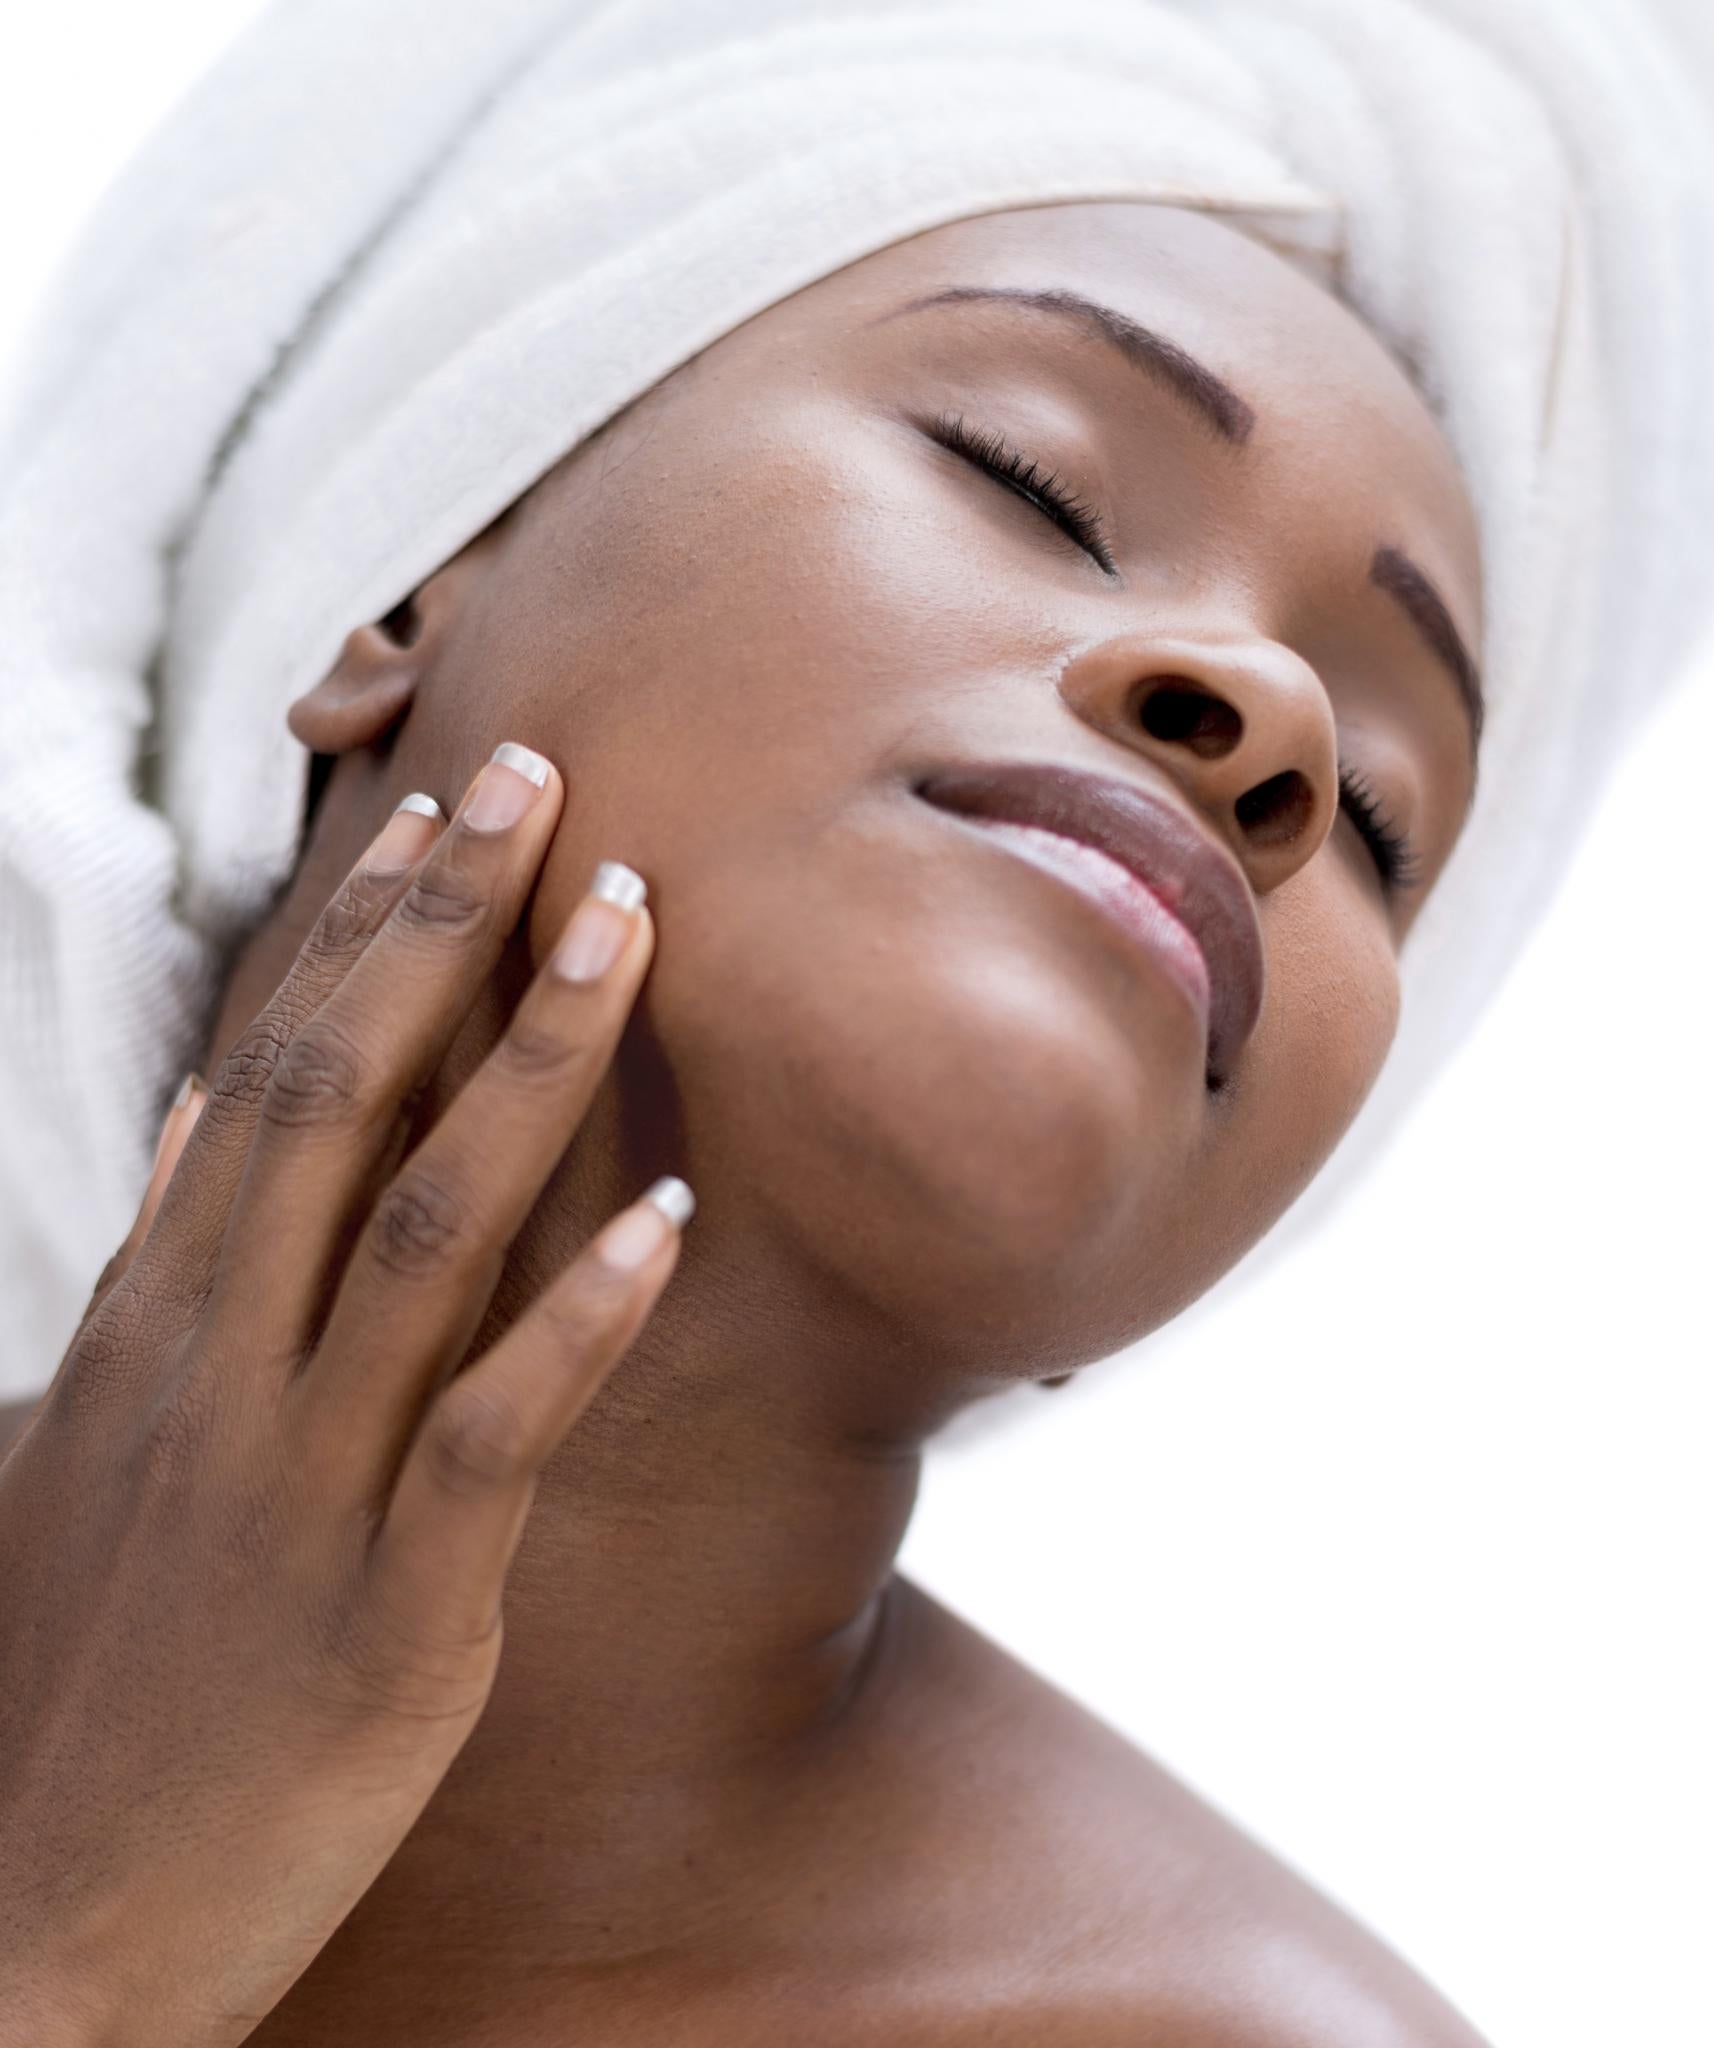 Is Your Skin Ready for Winter?